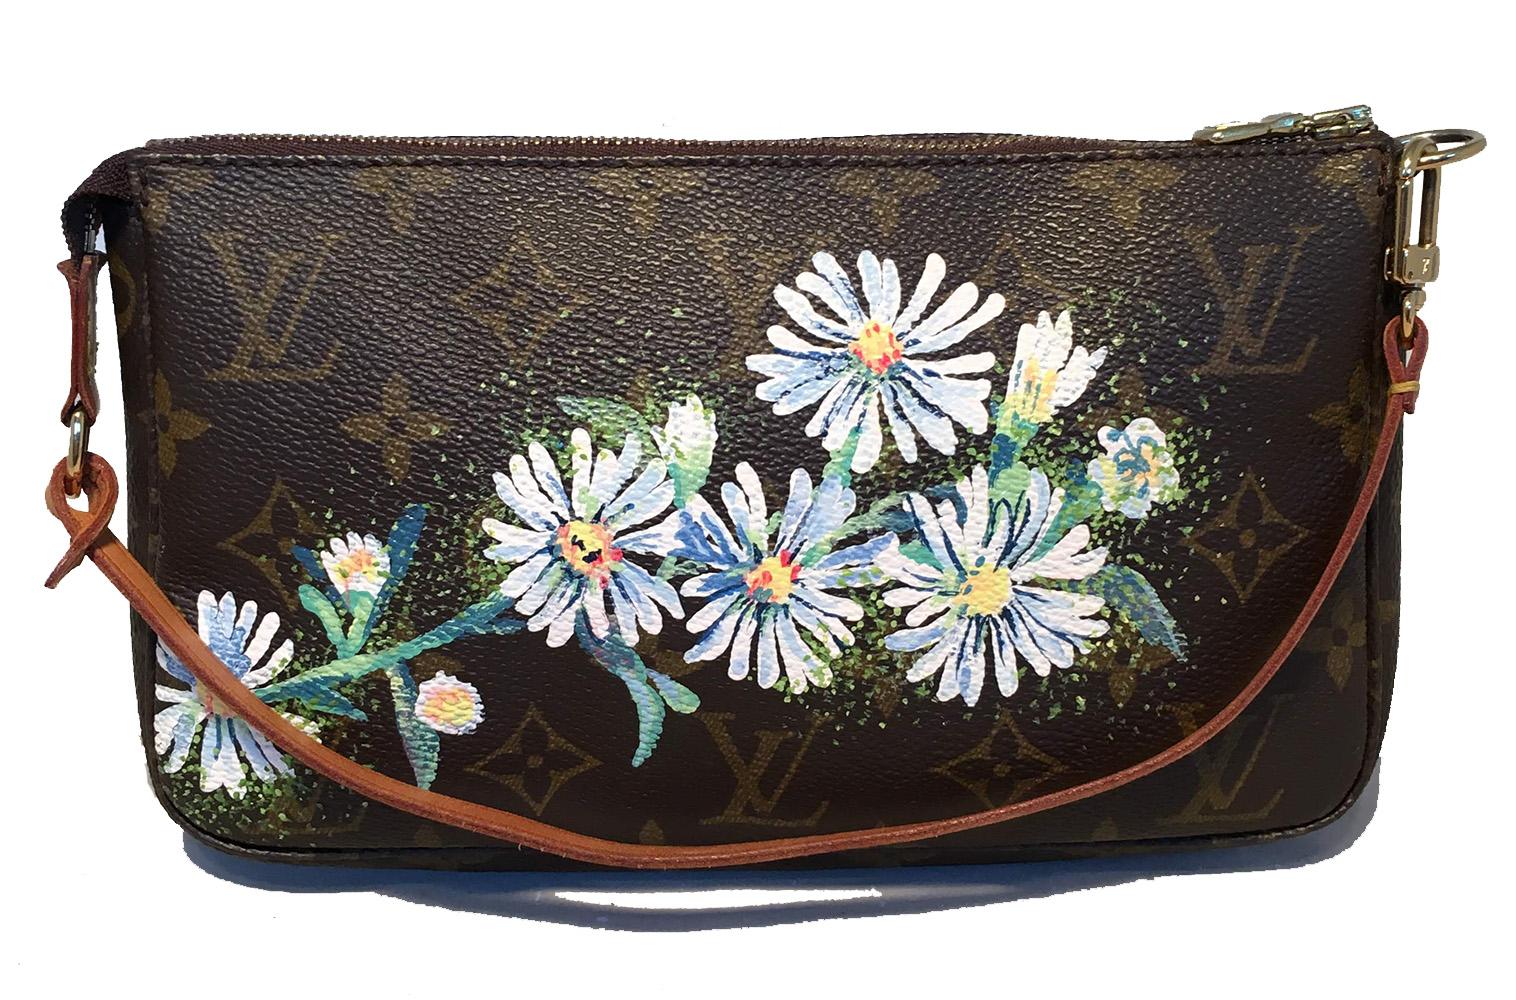 Louis Vuitton Monogram Painted Daisies Pochette Accessoires Accessories Pouch in excellent condition. Signature louis vuitton monogram canvas trimmed with tan leather and golden hardware. Hand painted cluster of white daisies along the front with